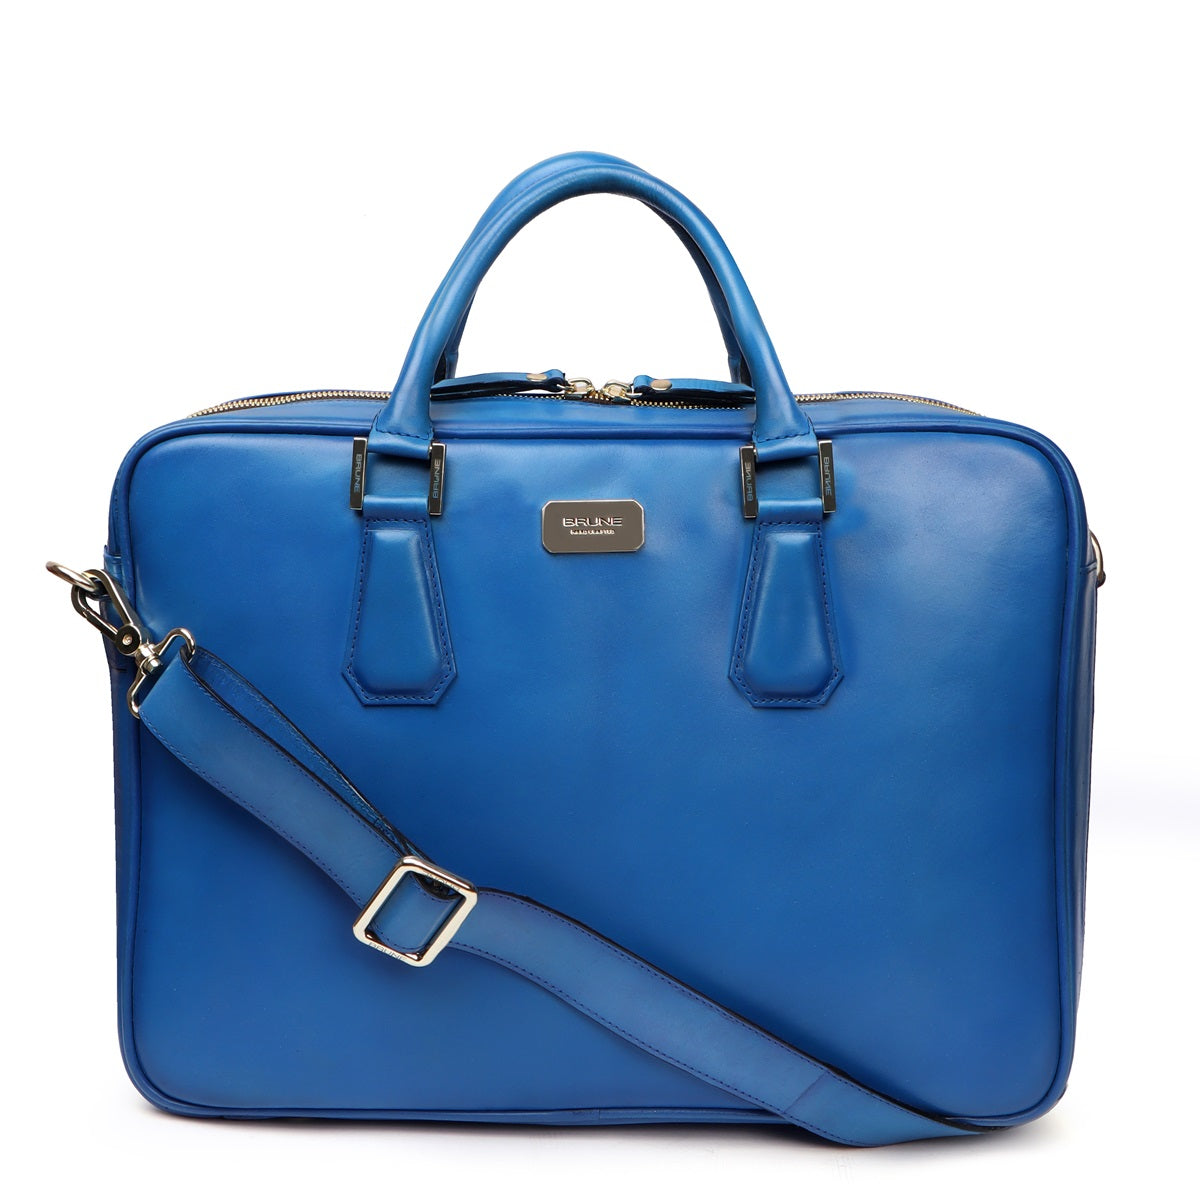 Self-Portrait The Bow Bag Mini Leather Bag in Blue | Lyst